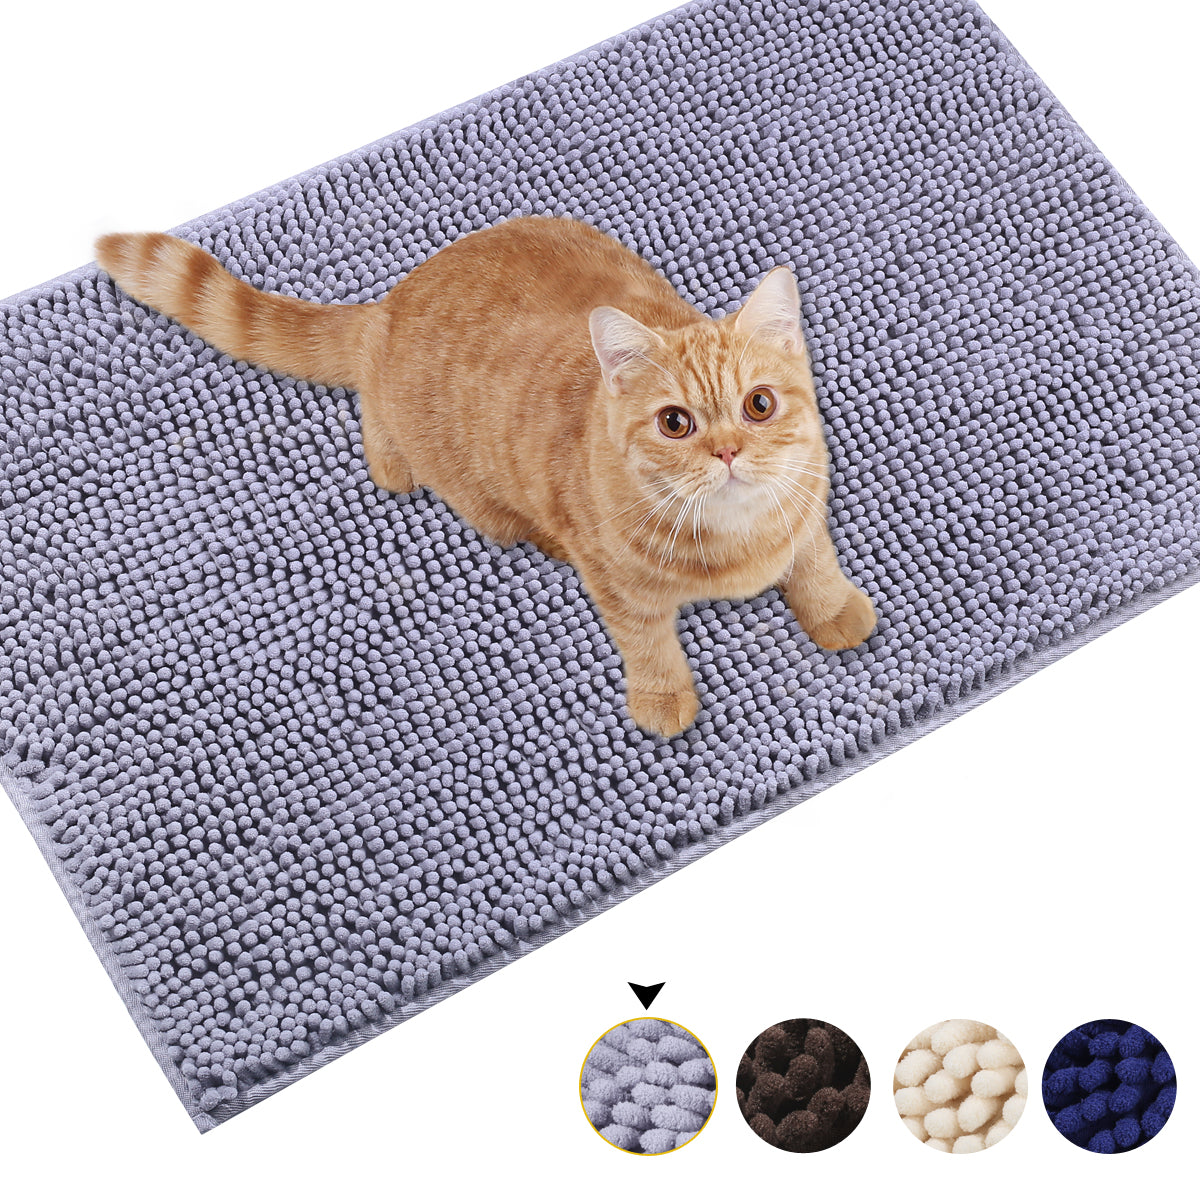 VIVAGLORY Soft Cat Litter Box Mat, Large Litter Trapping Mat for Indoor  Cat, Machine Washable Cat Kitty Litter Tray with No-slip and Waterproof,  31×